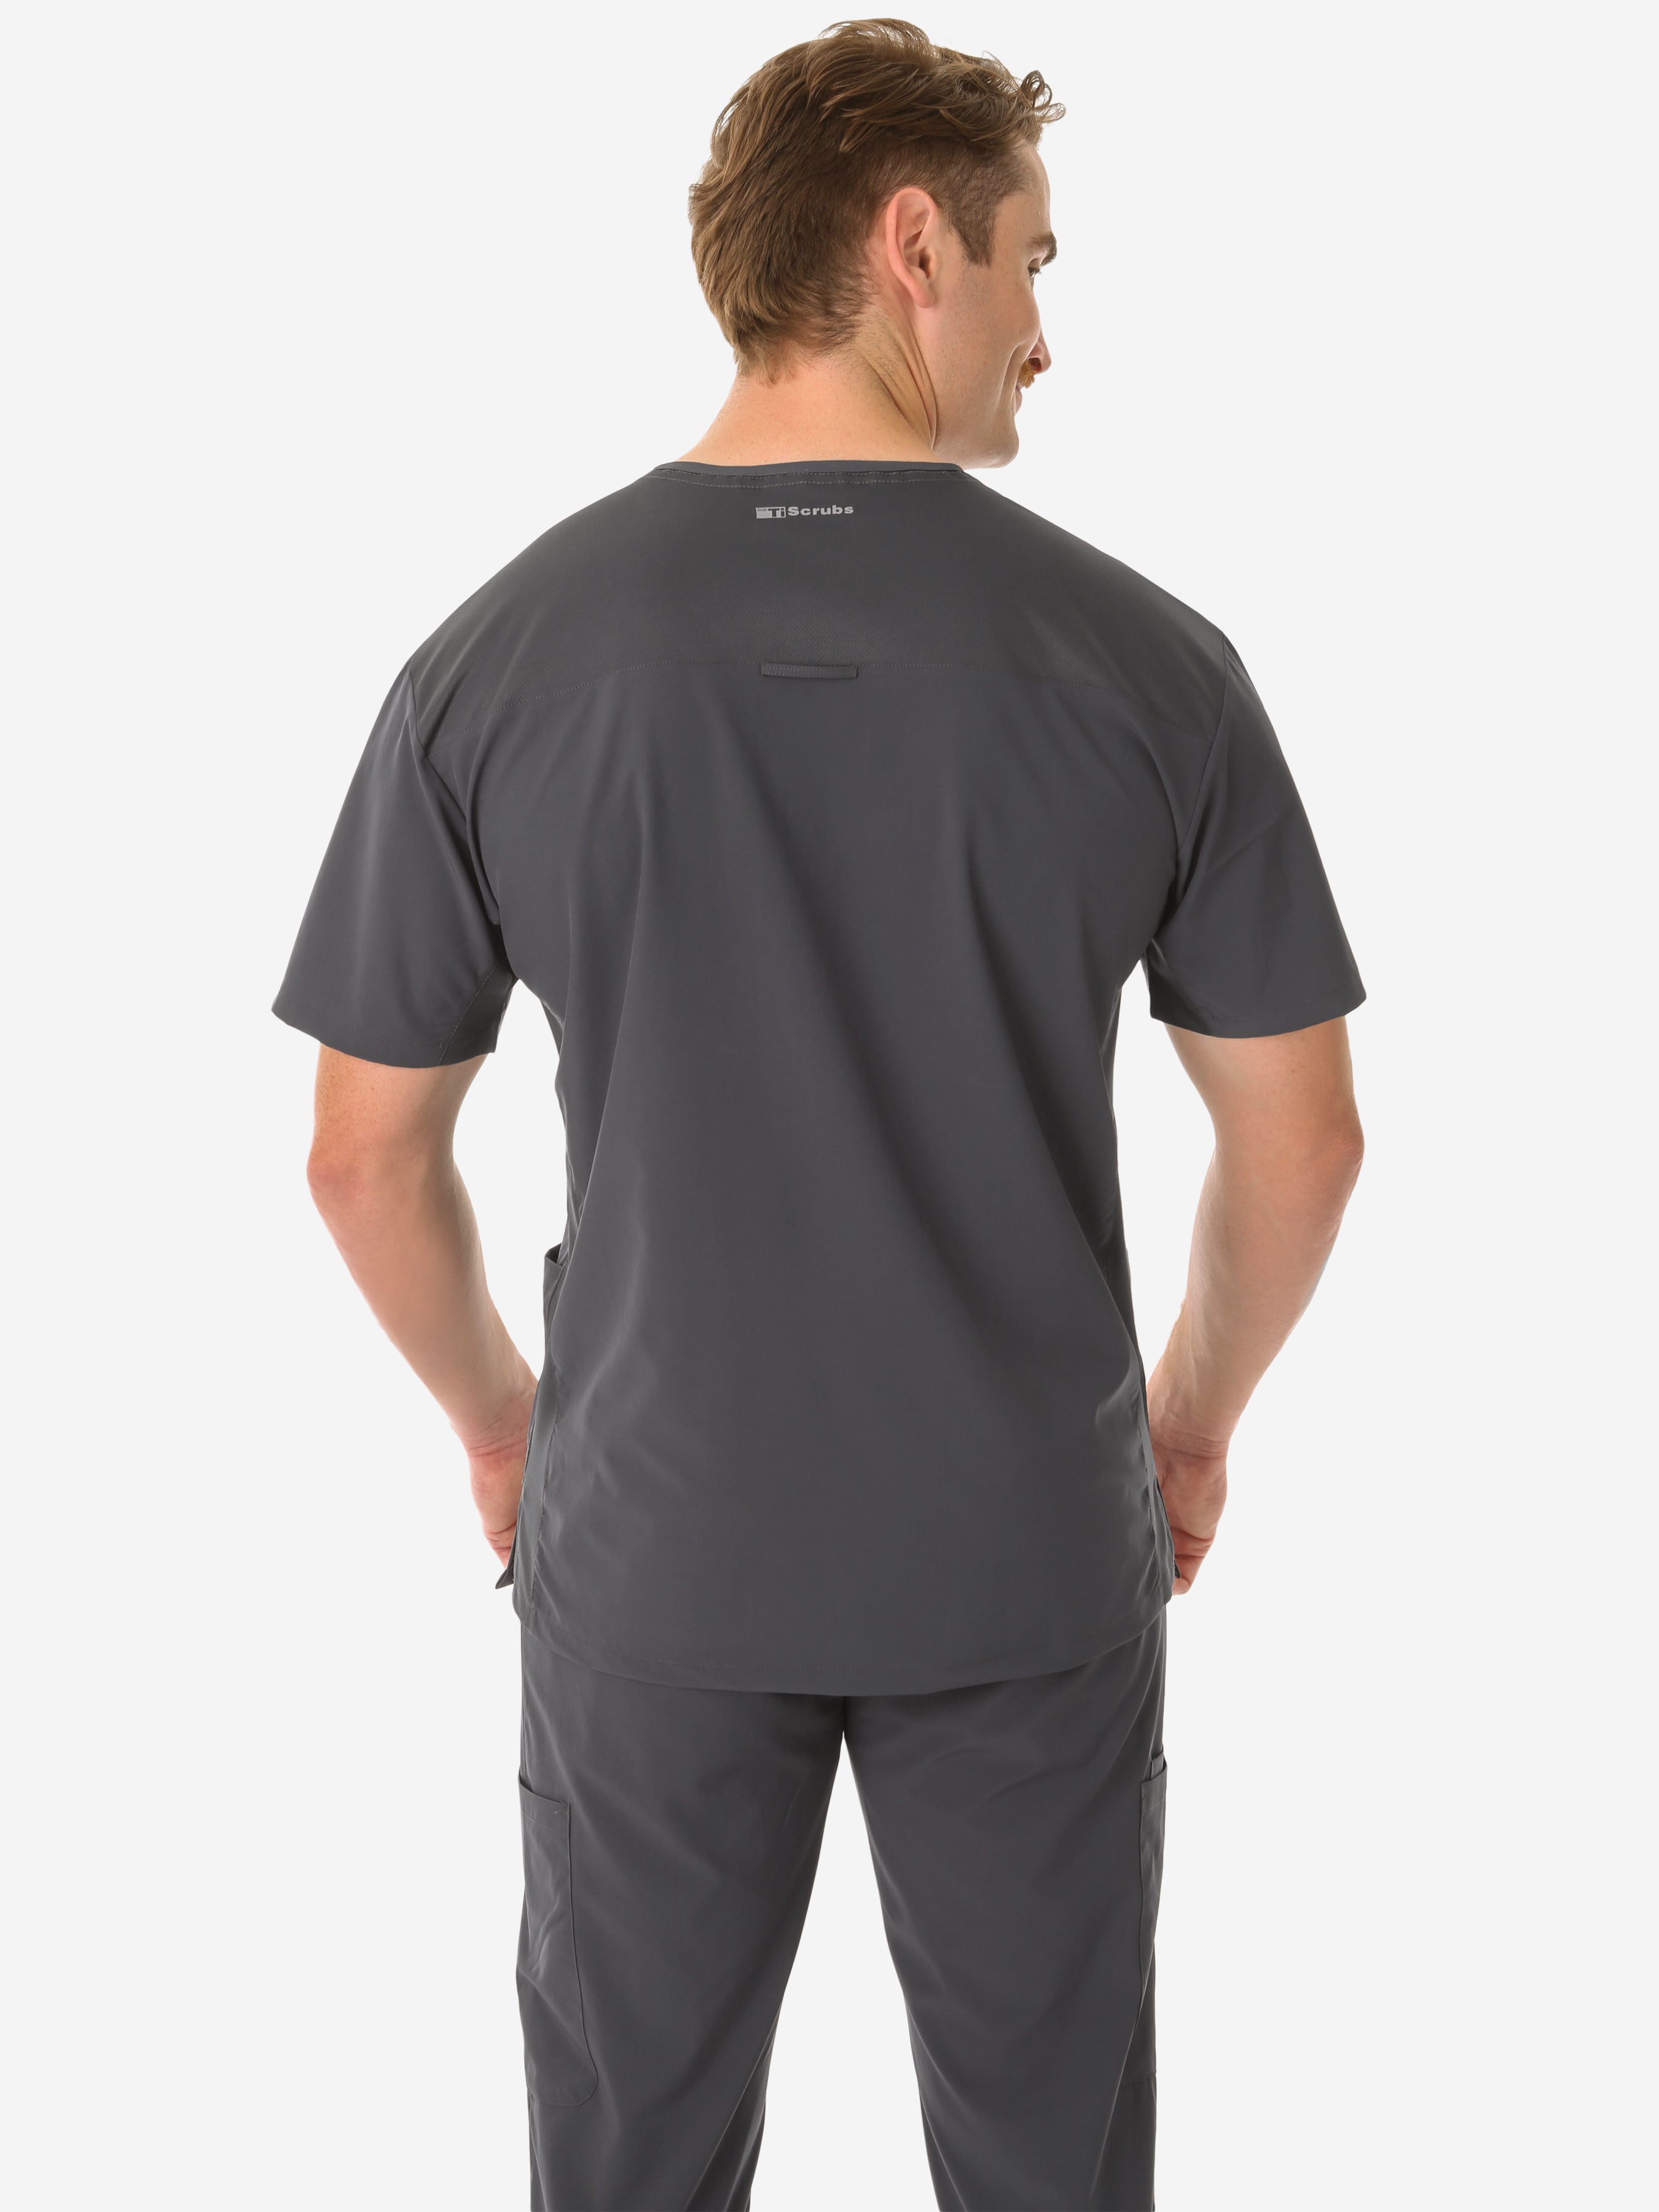 Men's Charocal Gray Five-Pocket Scrub Top Only Back View